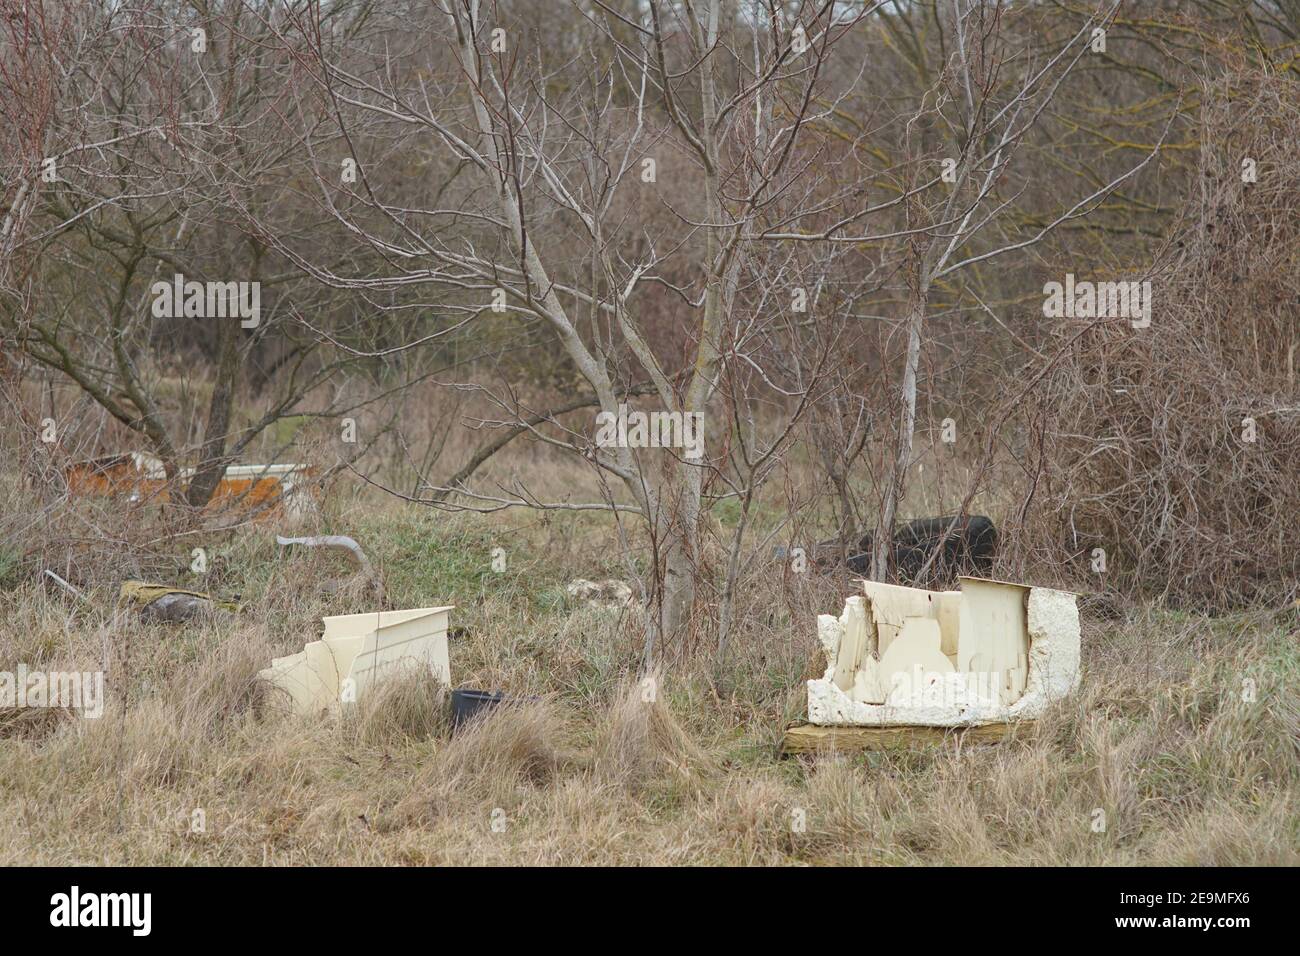 Bakonykoppany, Hungary - Febr 03, 2021: An illegal garbage dump in the nature at the side of Bakonykoppany Village in Hungary. Plastic and other waste Stock Photo